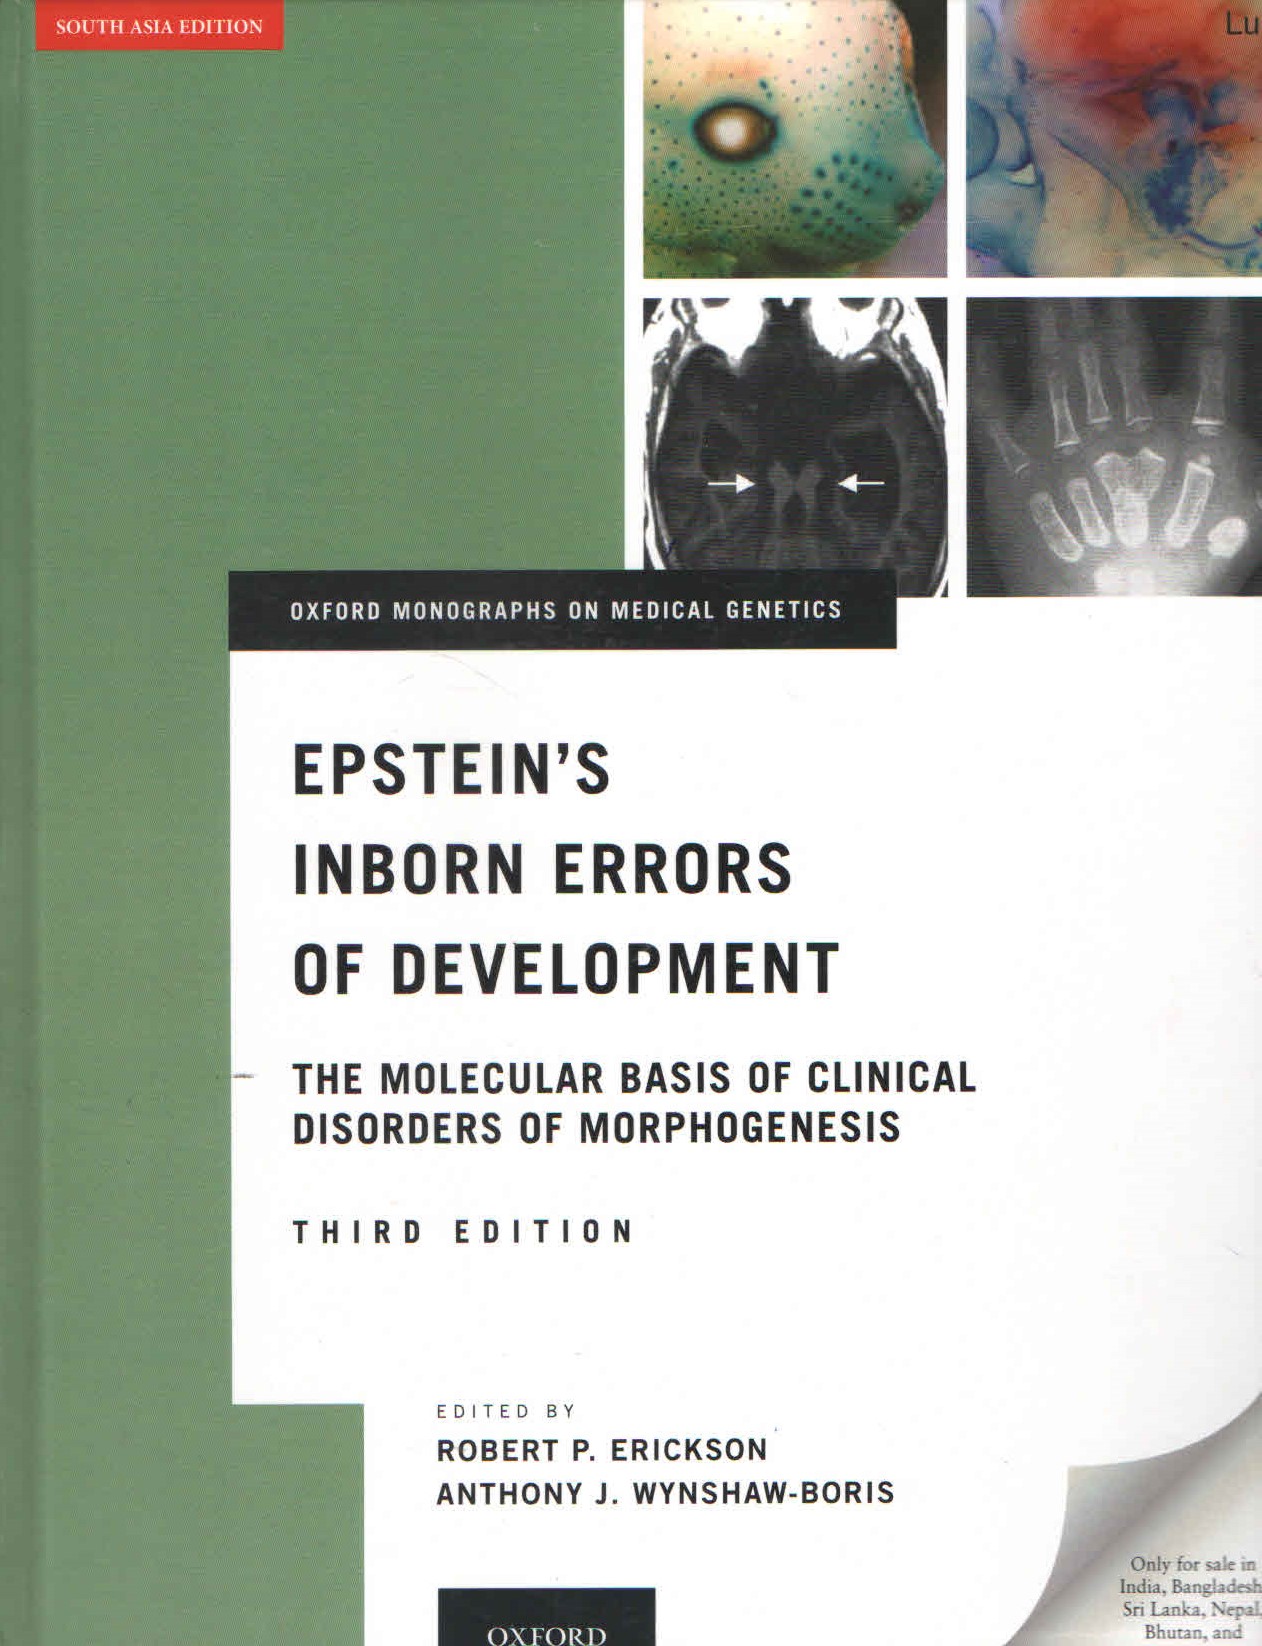 exclusive-publishers/oxford-university-press/epstein-s-inborn-error-of-development:-the-molecular-basis-of-clinical-disorders-of-morphogenesis-9780197770627